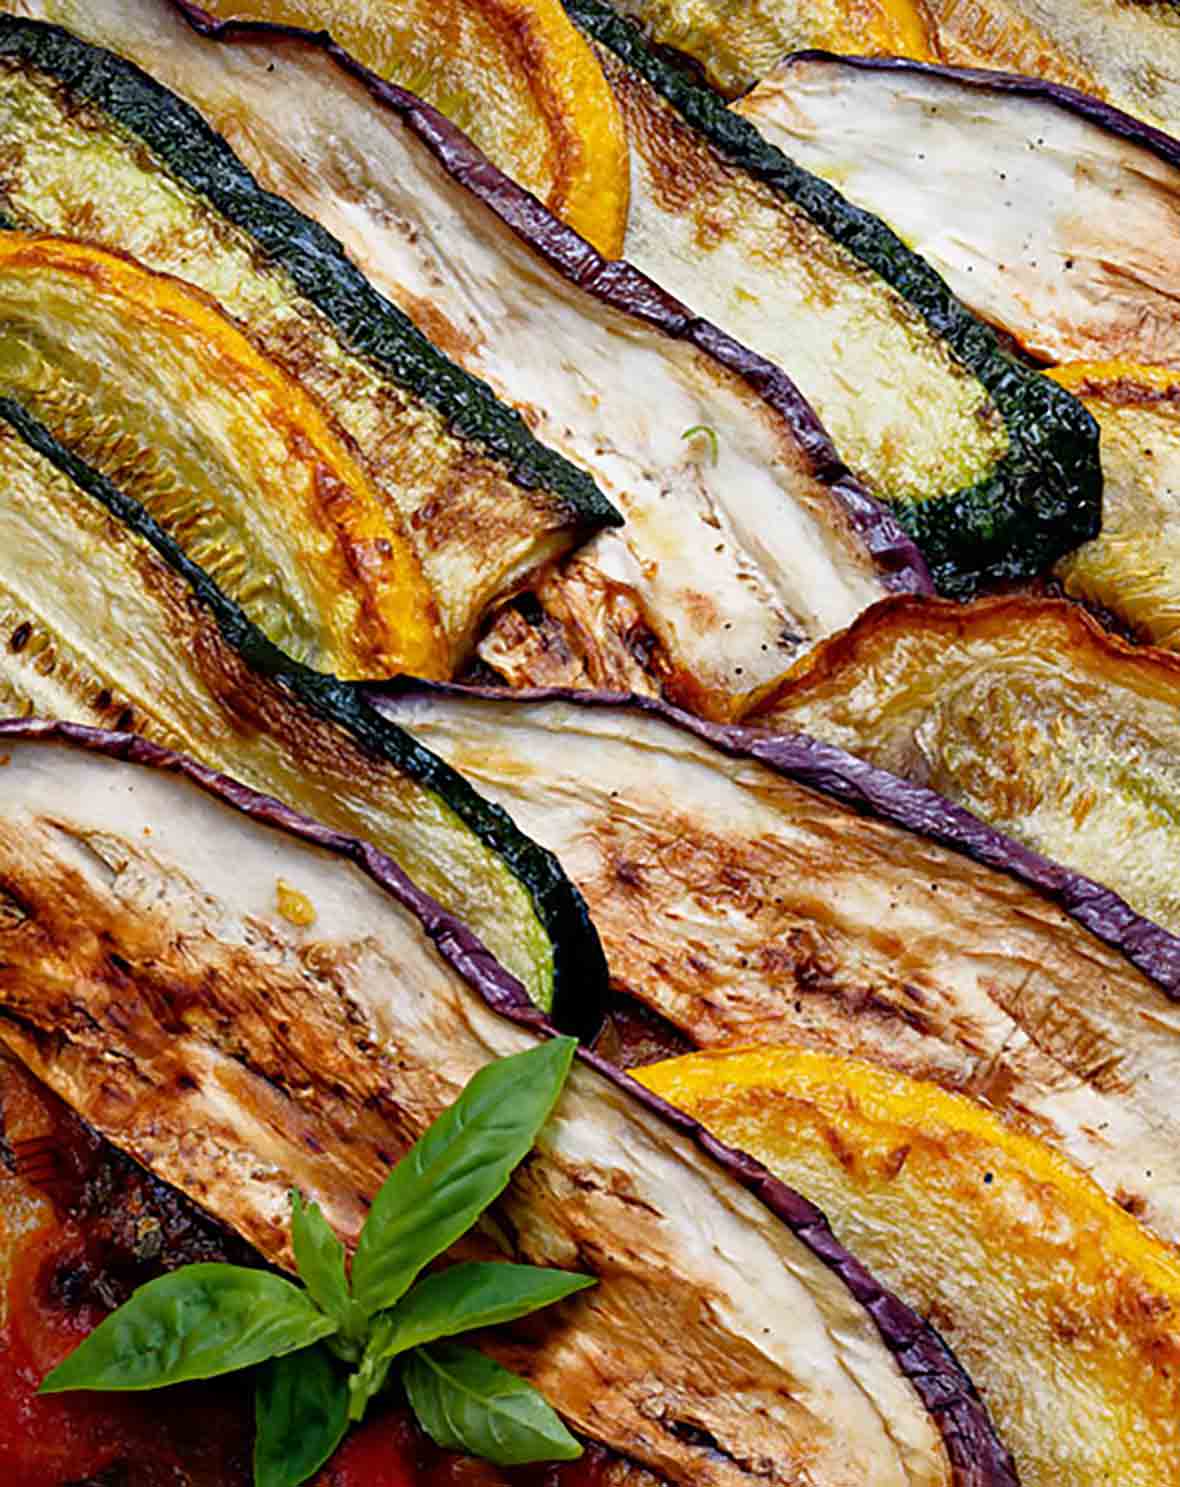 Layers of zucchini, summer squash, and eggplant cooked together and garnished with basil for this summer vegetable gratin.